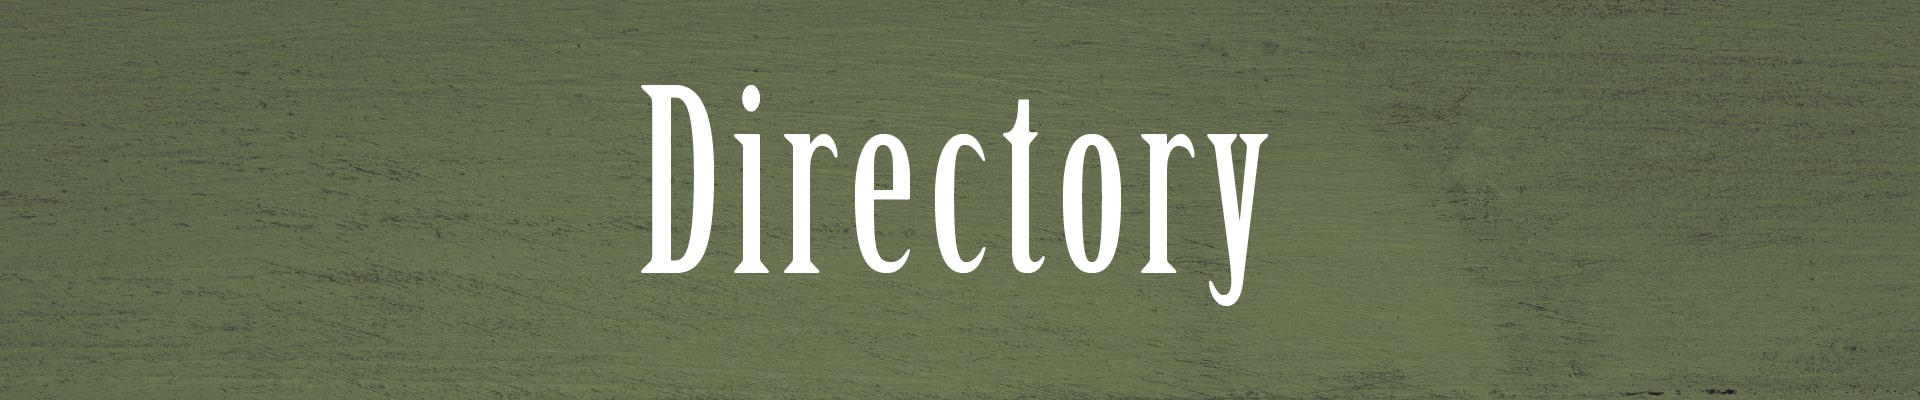 Directory page header